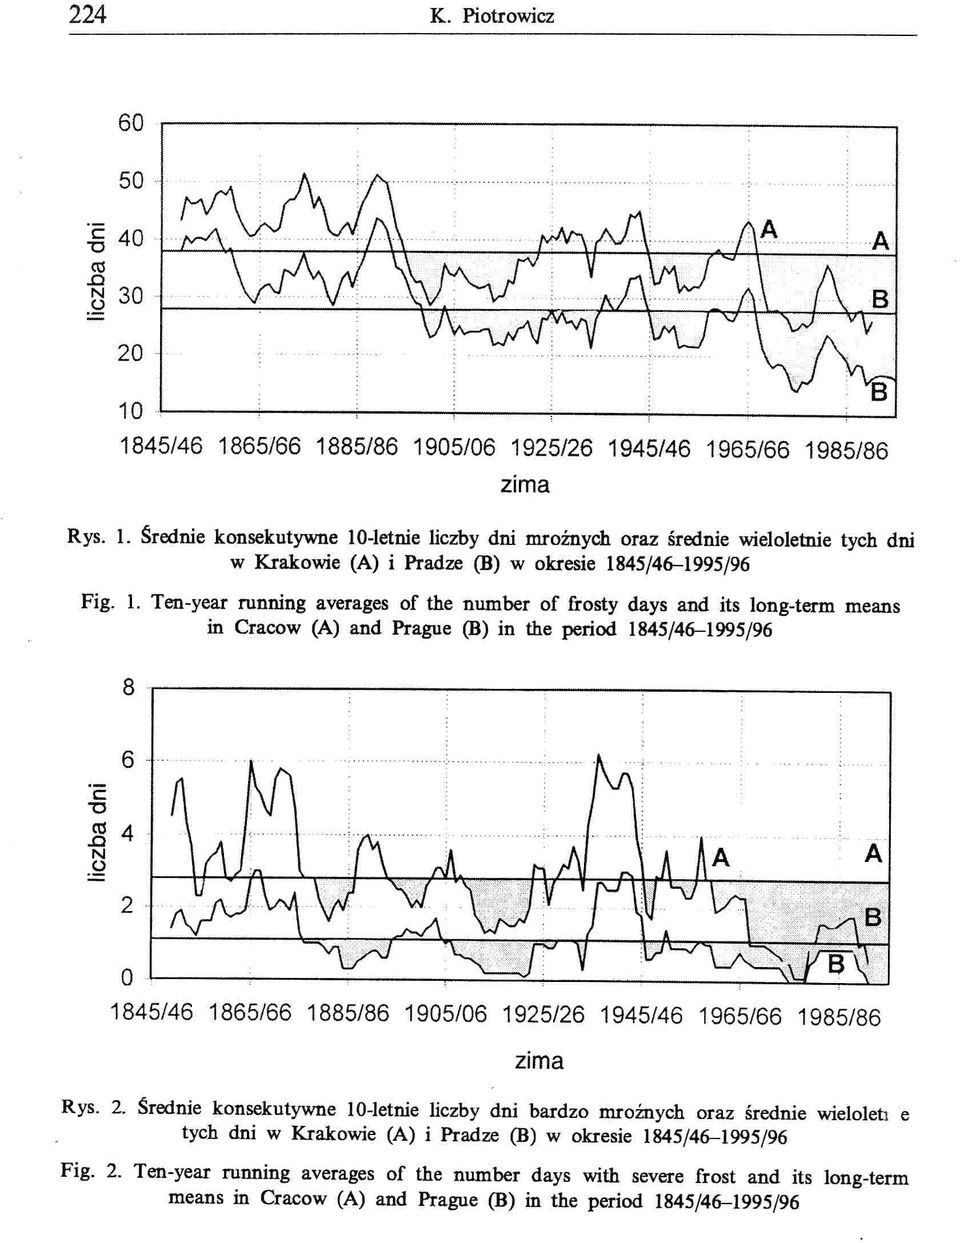 1. Ten-year running averages of the number of frosty days and its long-term means in Cracow (A) and Prague (B) in the period 1845/46-1995/96 8. 6 'c "O ttl.o 4 N.